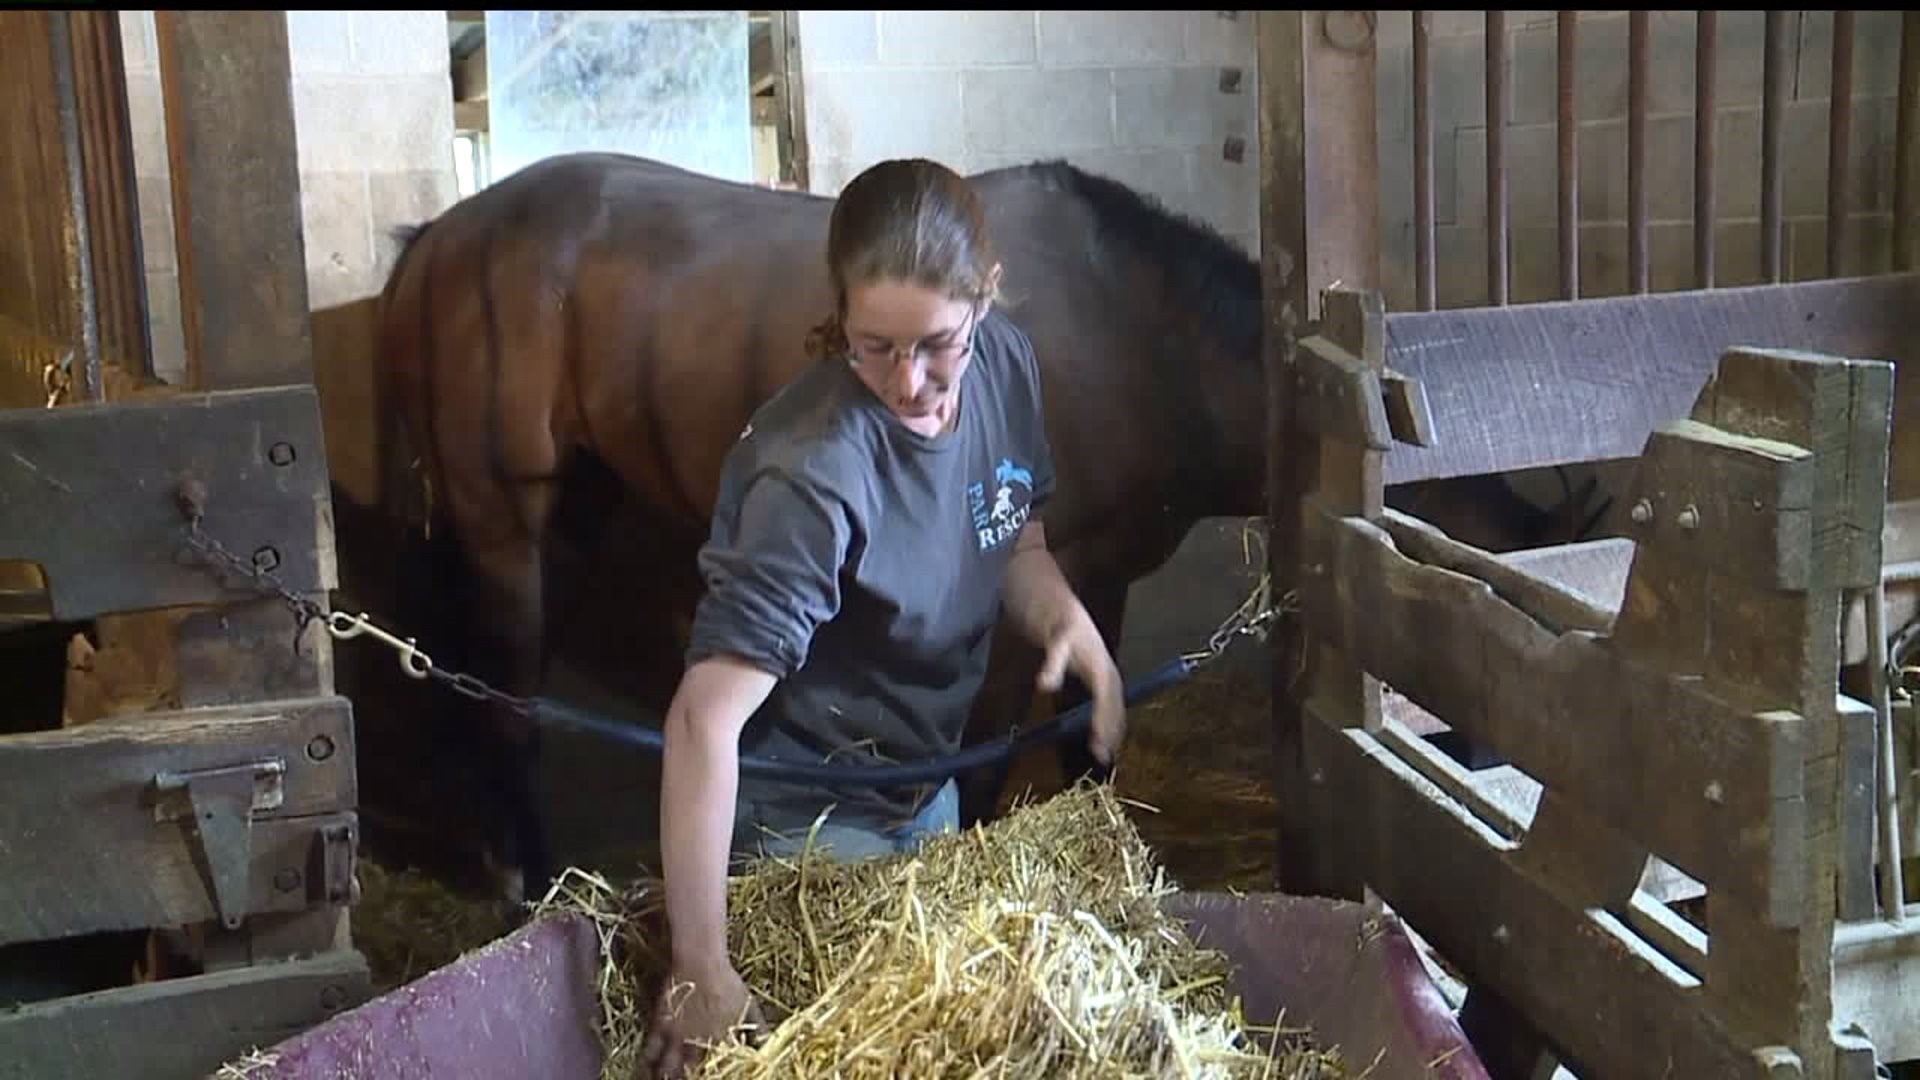 Horse rescue needs to raise $10,000 to stay open